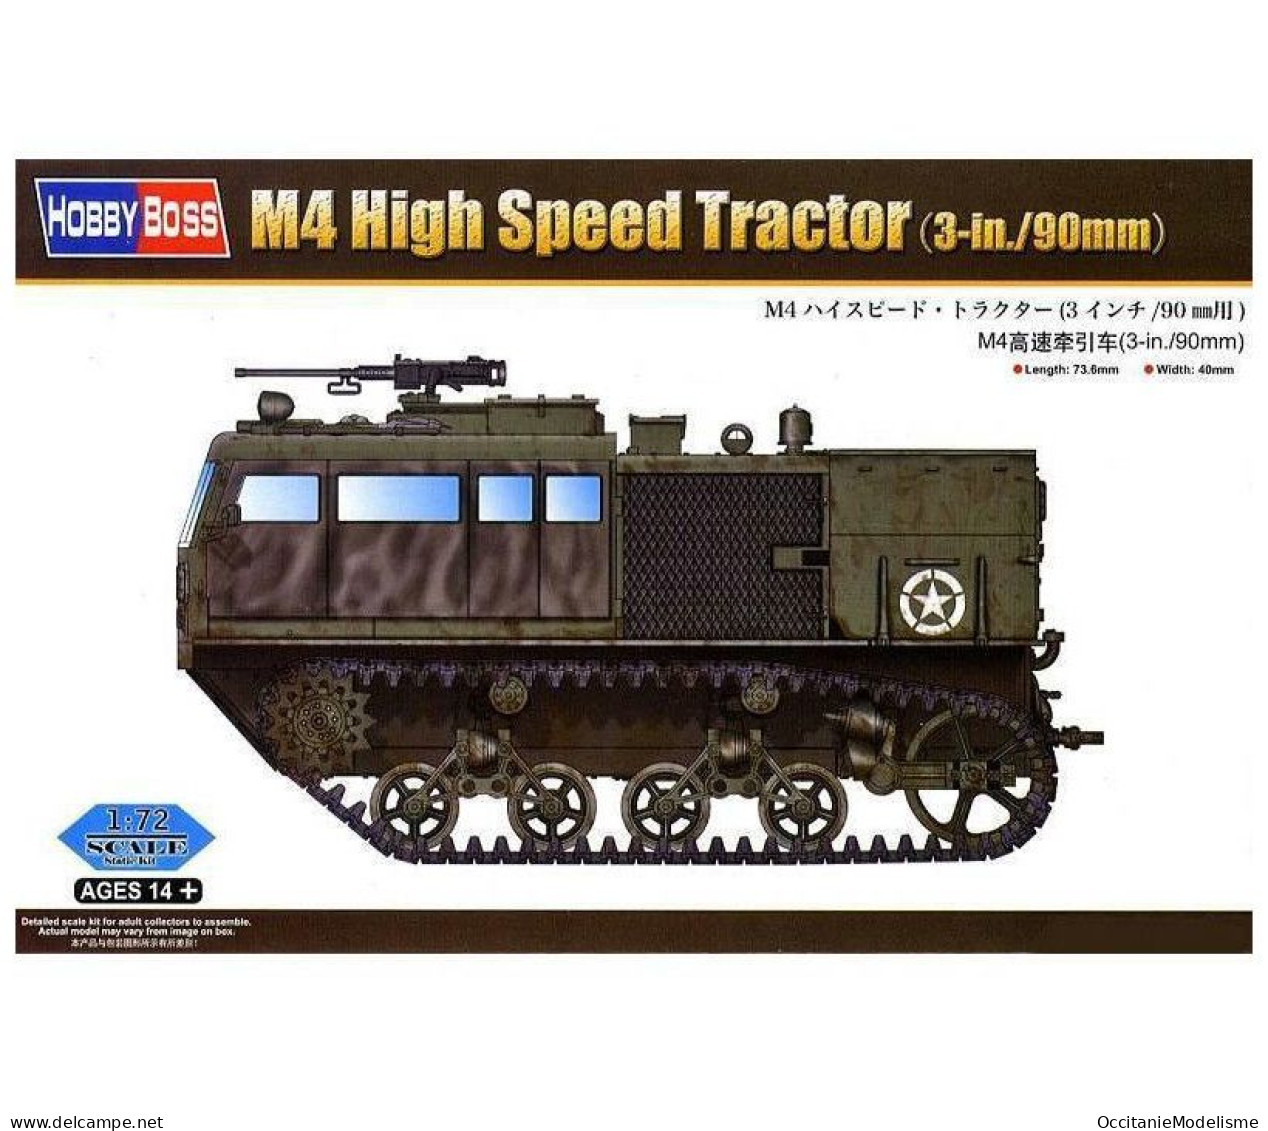 HobbyBoss - Char M4 High Speed Tractor (3-in./90mm) Maquette Kit Plastique Réf. 82920 Neuf NBO 1/72 - Véhicules Militaires